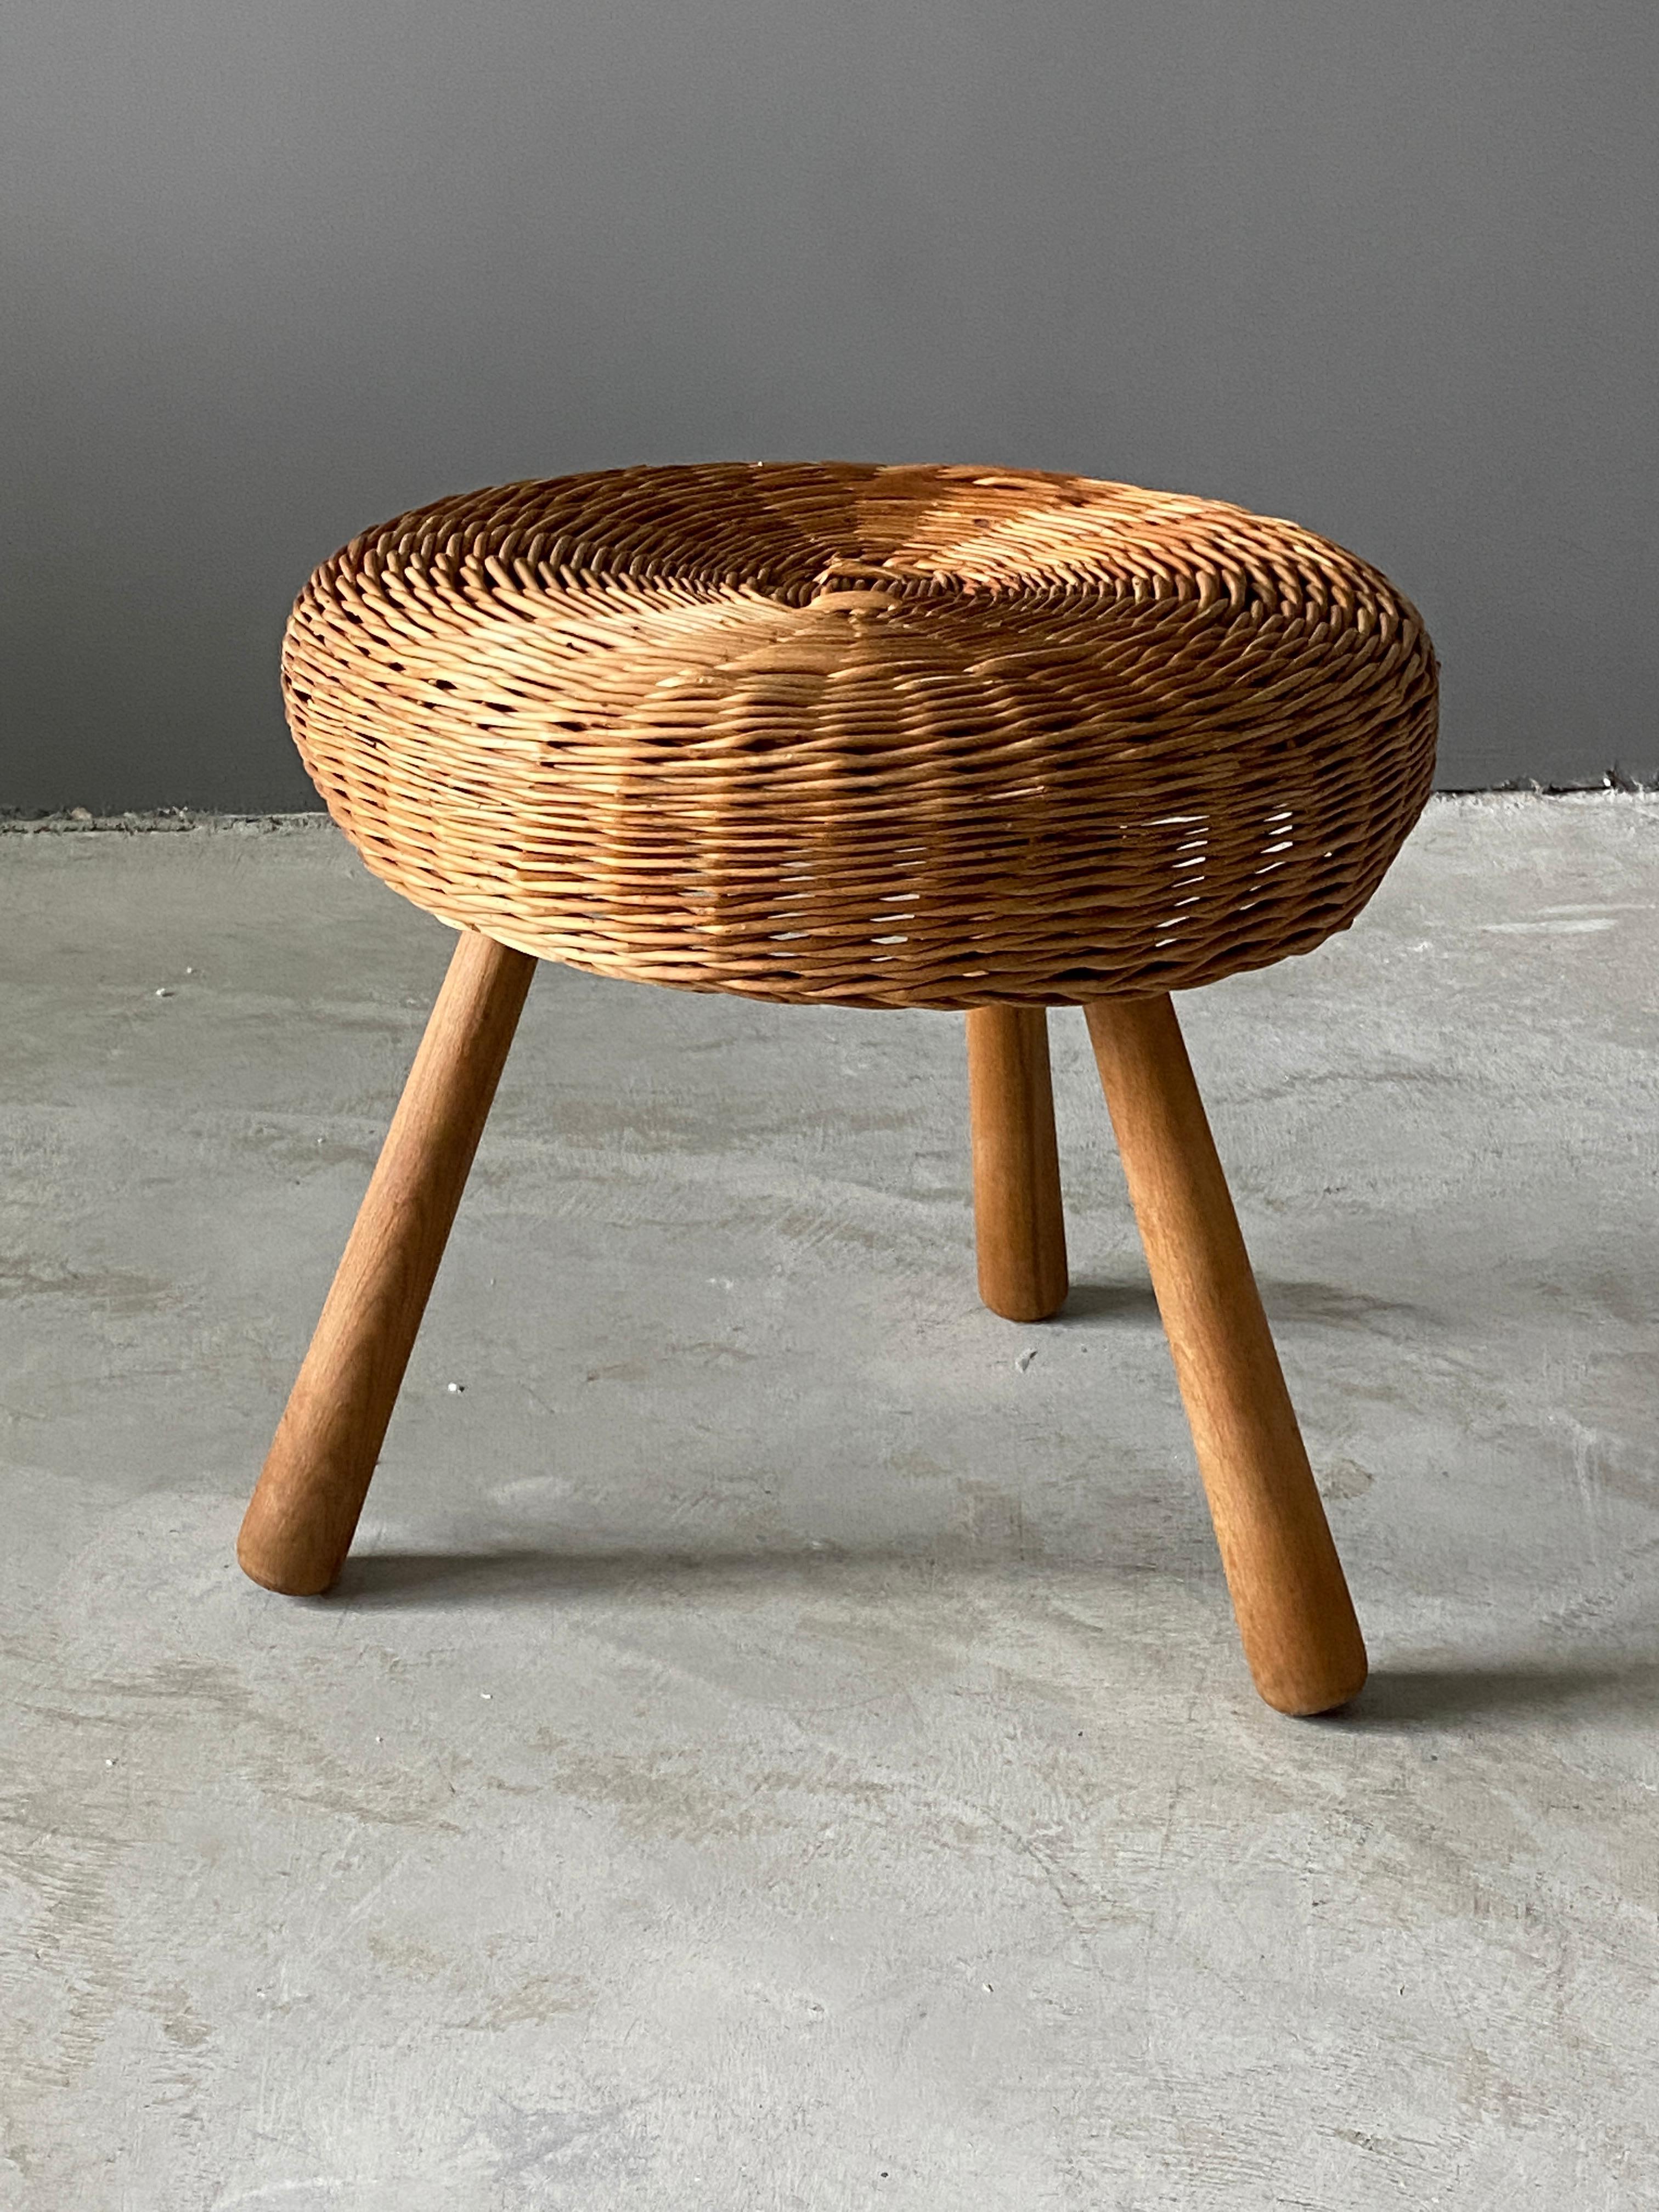 A large version stool, design attributed to Tony Paul. Features an interesting mix of rattan and finely carved solid wood.

Other designers of Minimalist stools of the period include Charlotte Perriand, Pierre Chapo, Isamu Noguchi, Eero Arnio, and